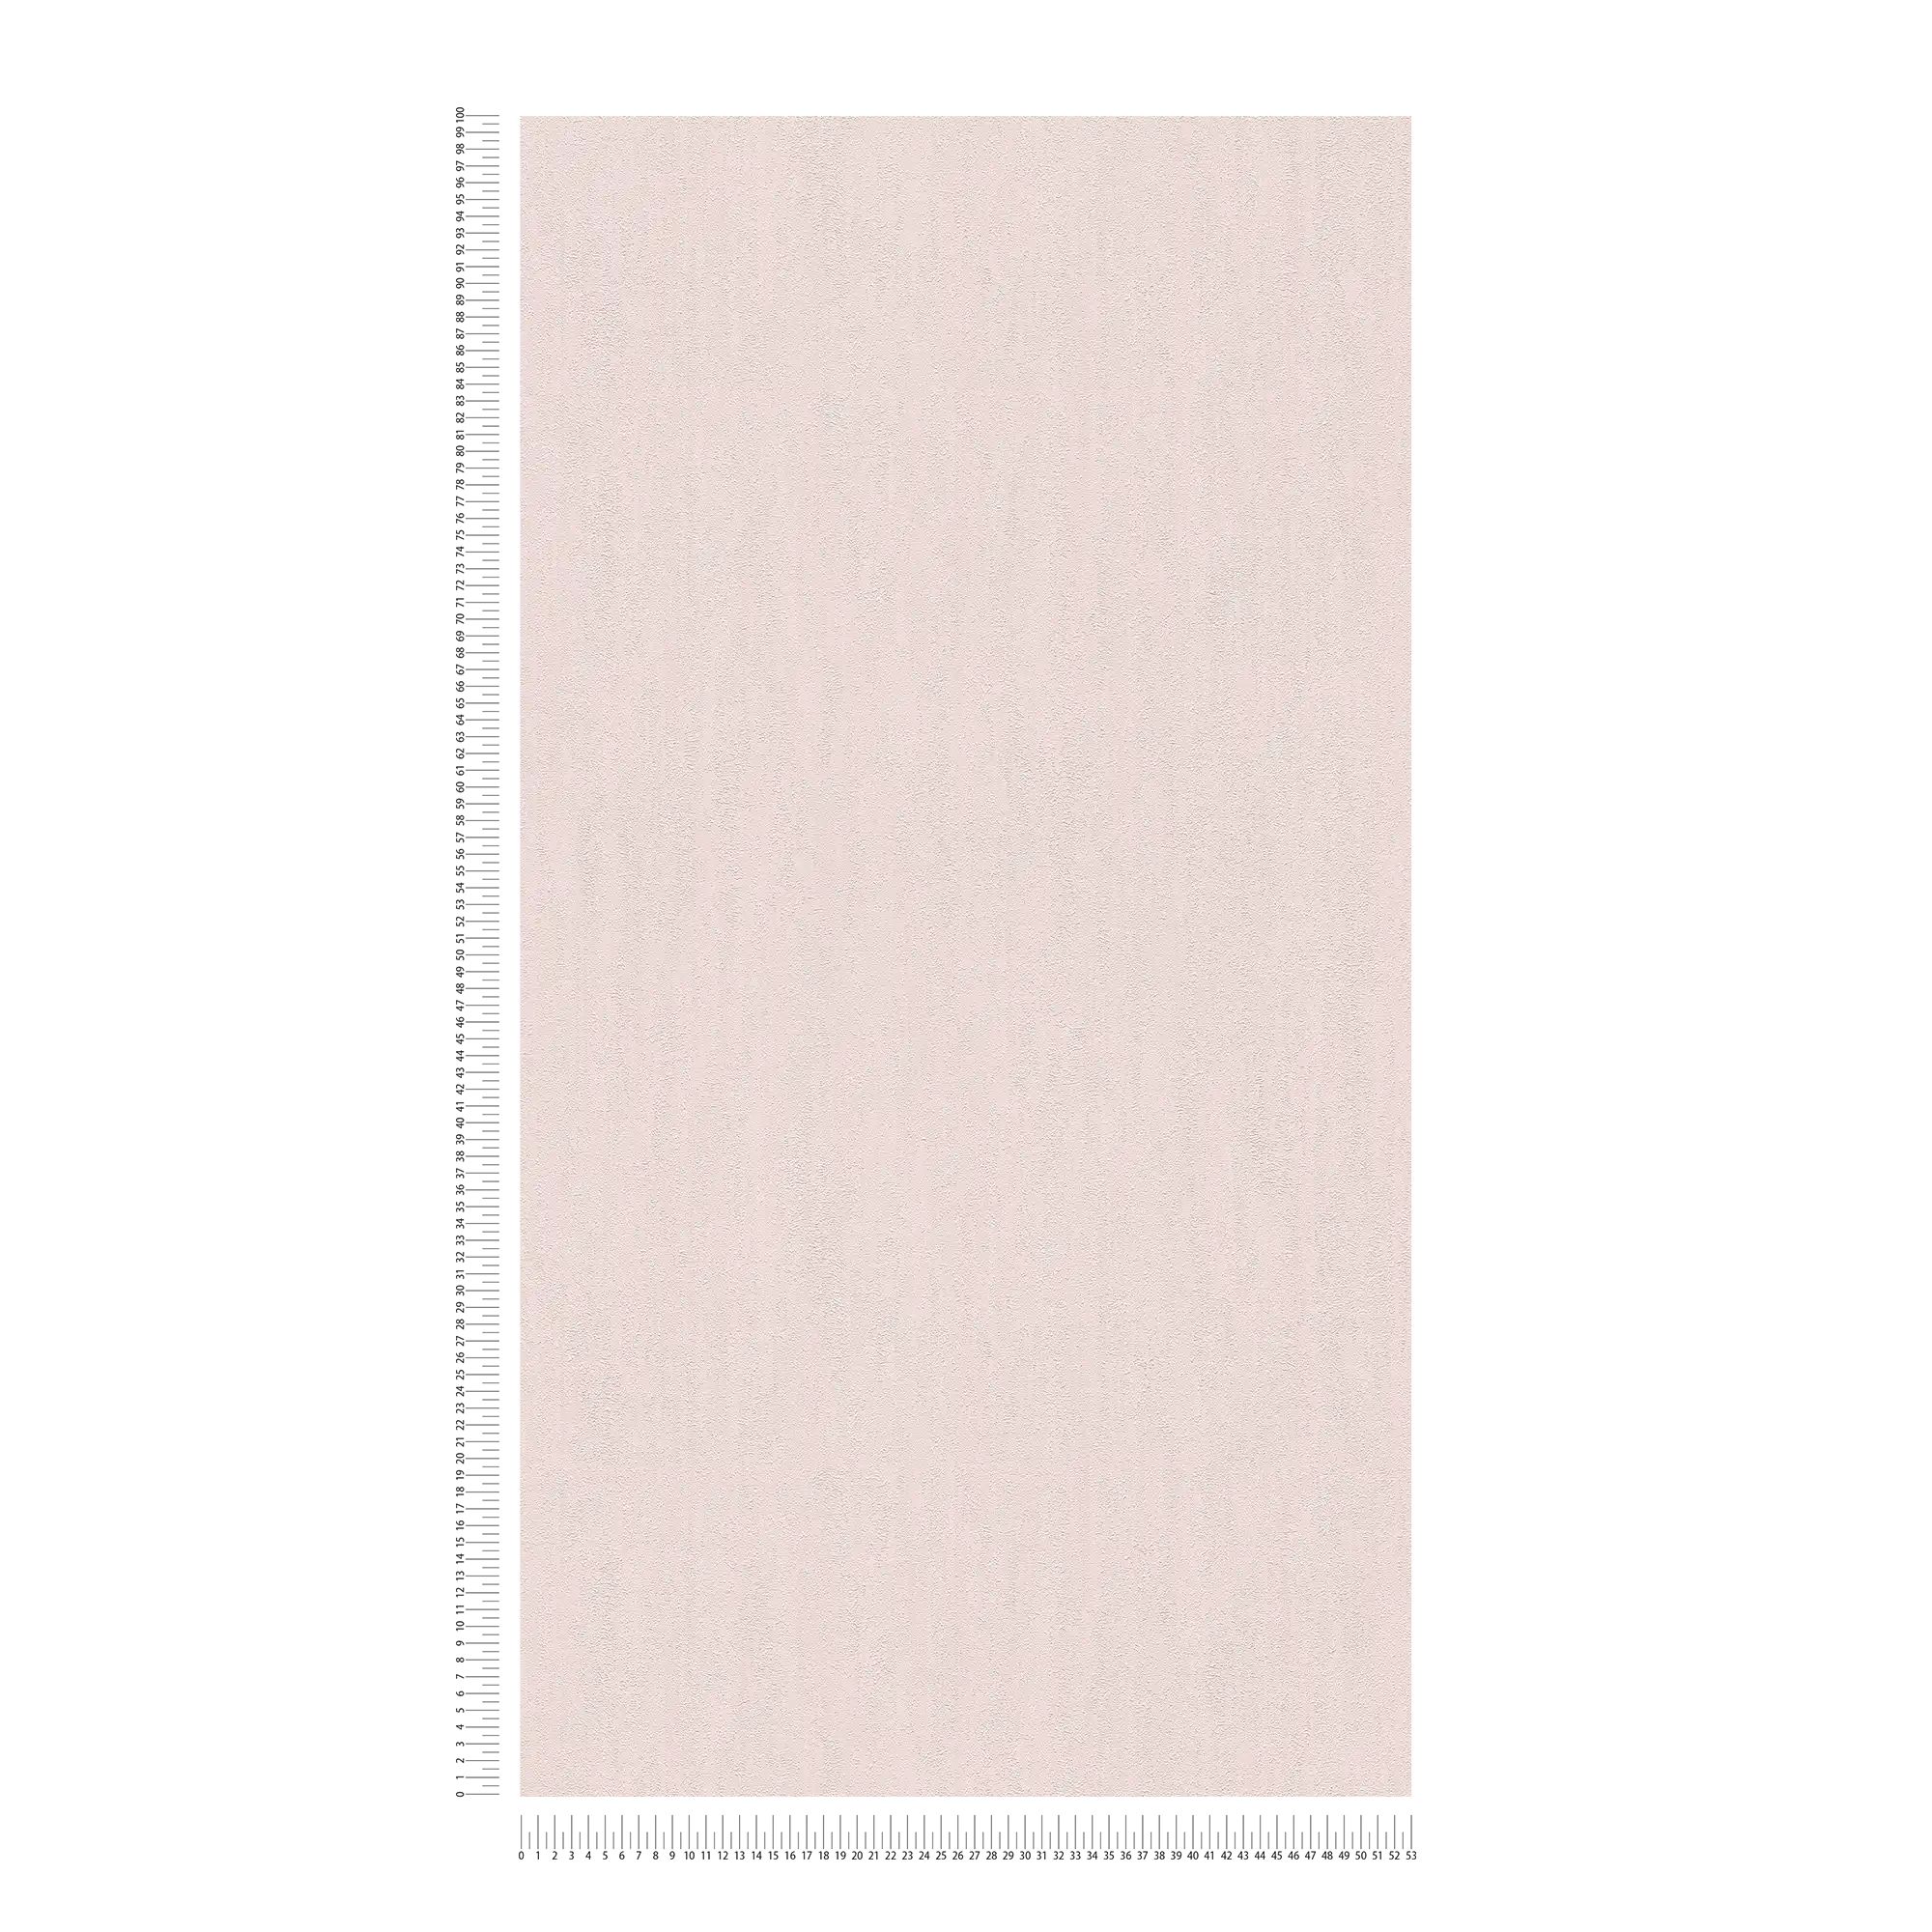             Pink wallpaper plain pastel baby pink with textured pattern
        